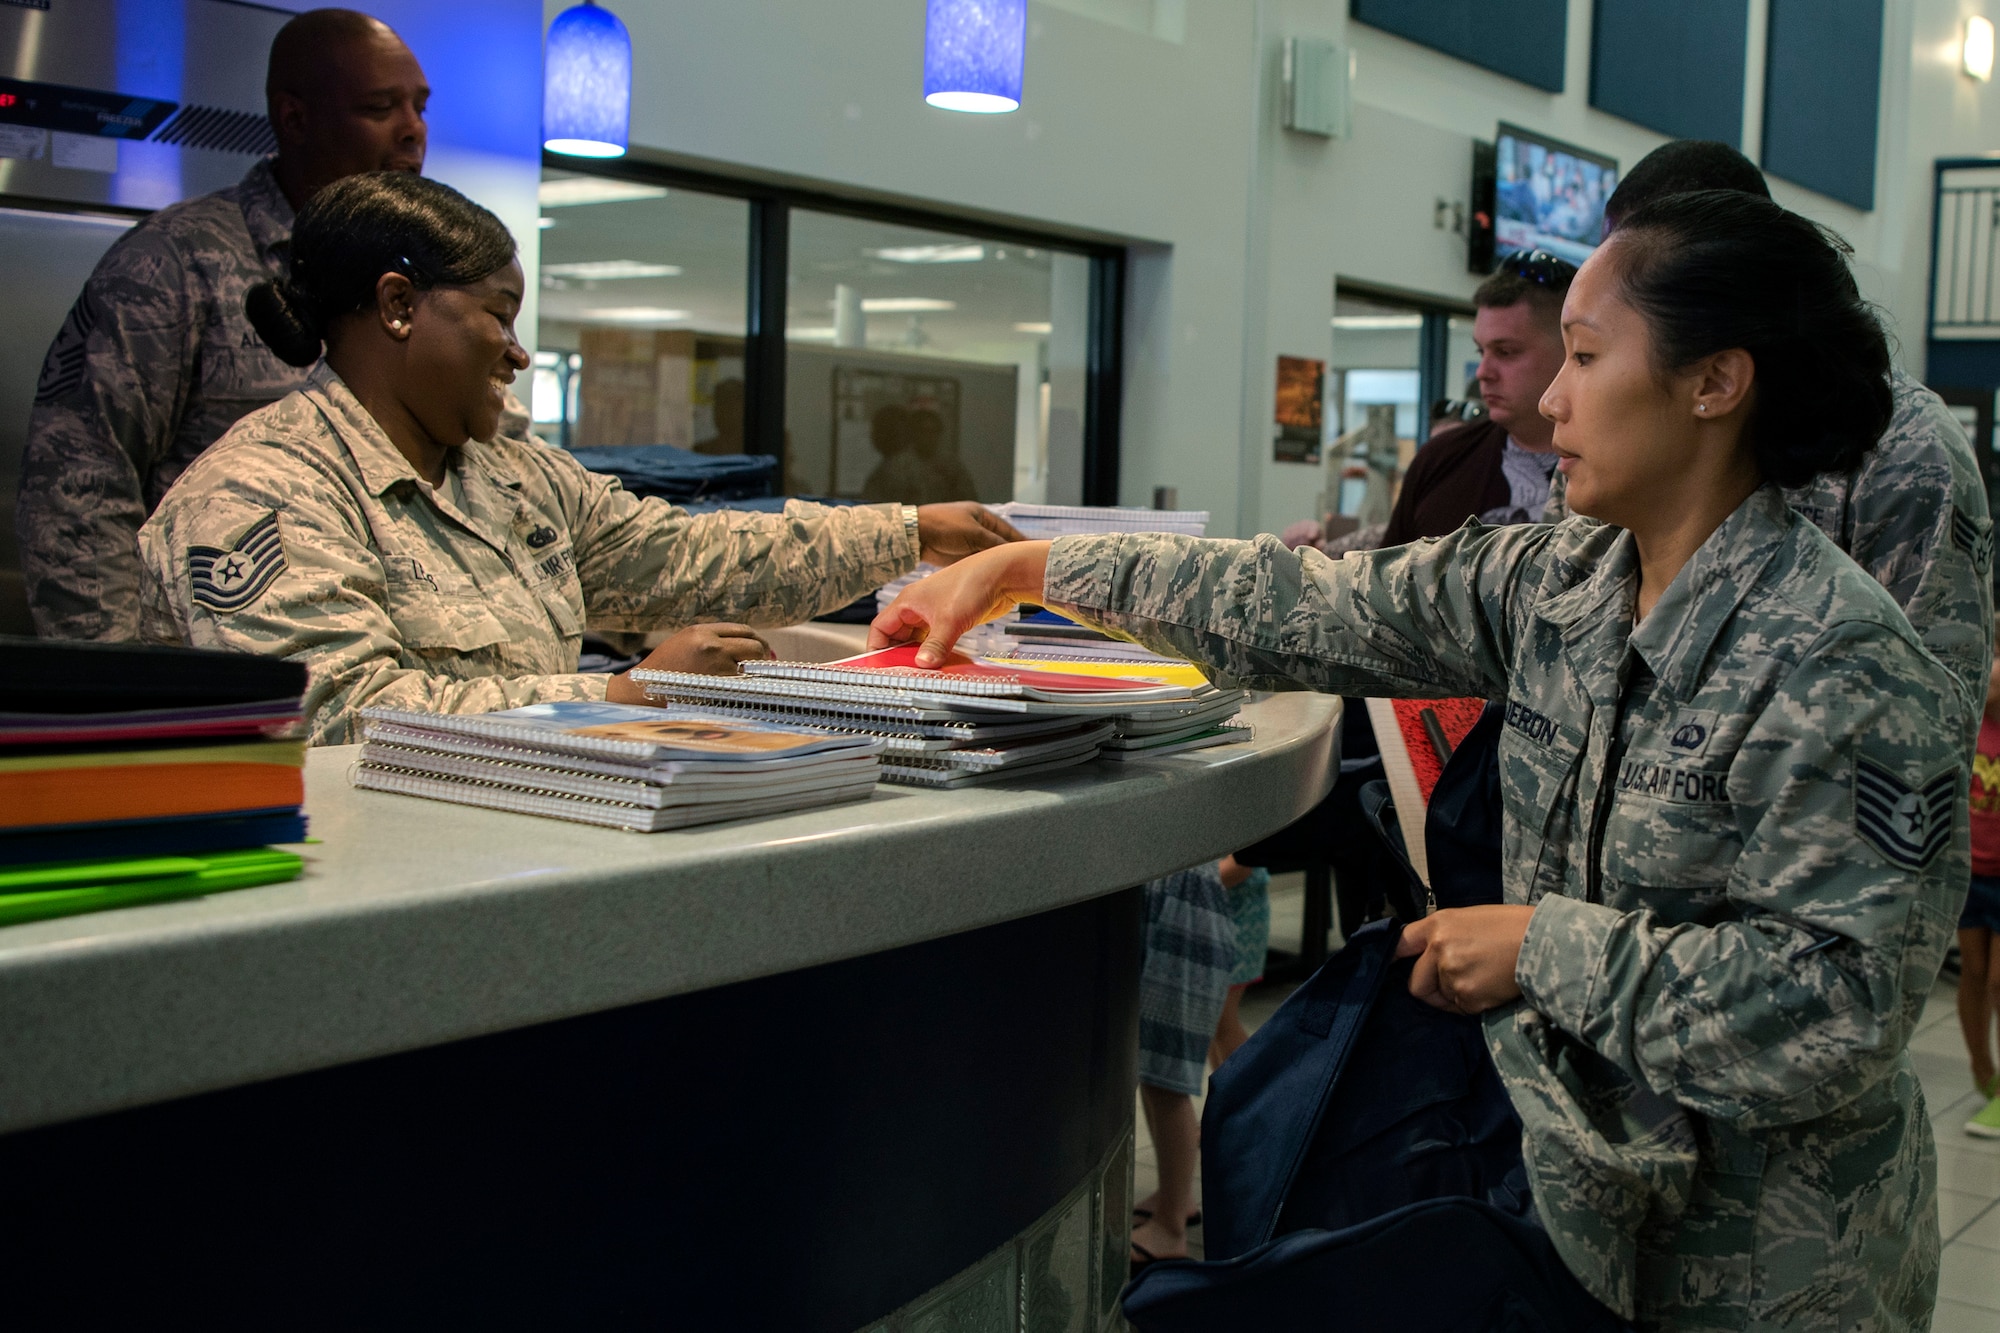 An Airman picks up a notebook at the Back-To-School Brigade, July 25, 2018, at Moody Air Force Base, Ga. With the help of Operation Homefront and the local community, the event provided Moody Airmen, grades E-1 through E-6, with school supplies. (U.S. Air Force photo by Airman Taryn Butler)